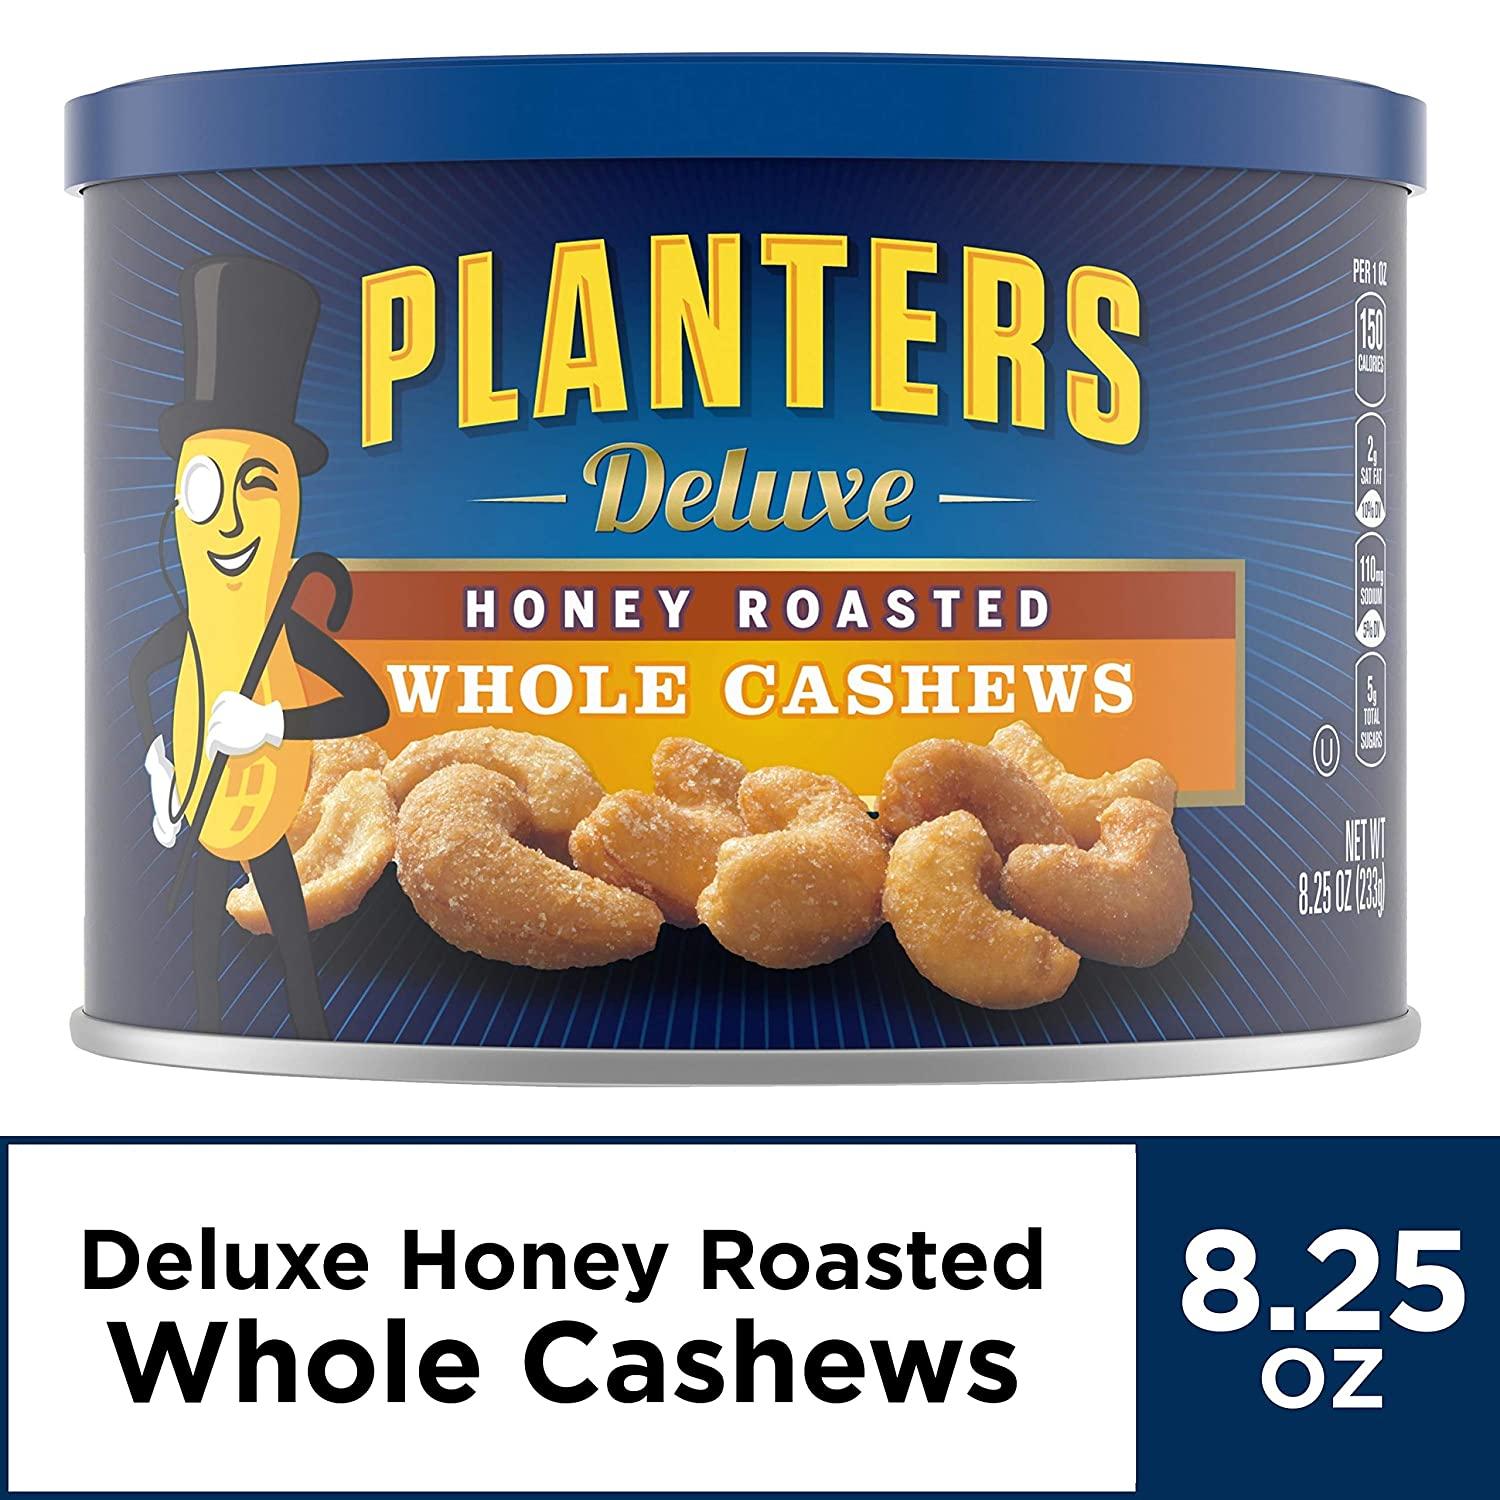  Planters Mixed Nuts, Honey Roasted, 10 Ounce Canister